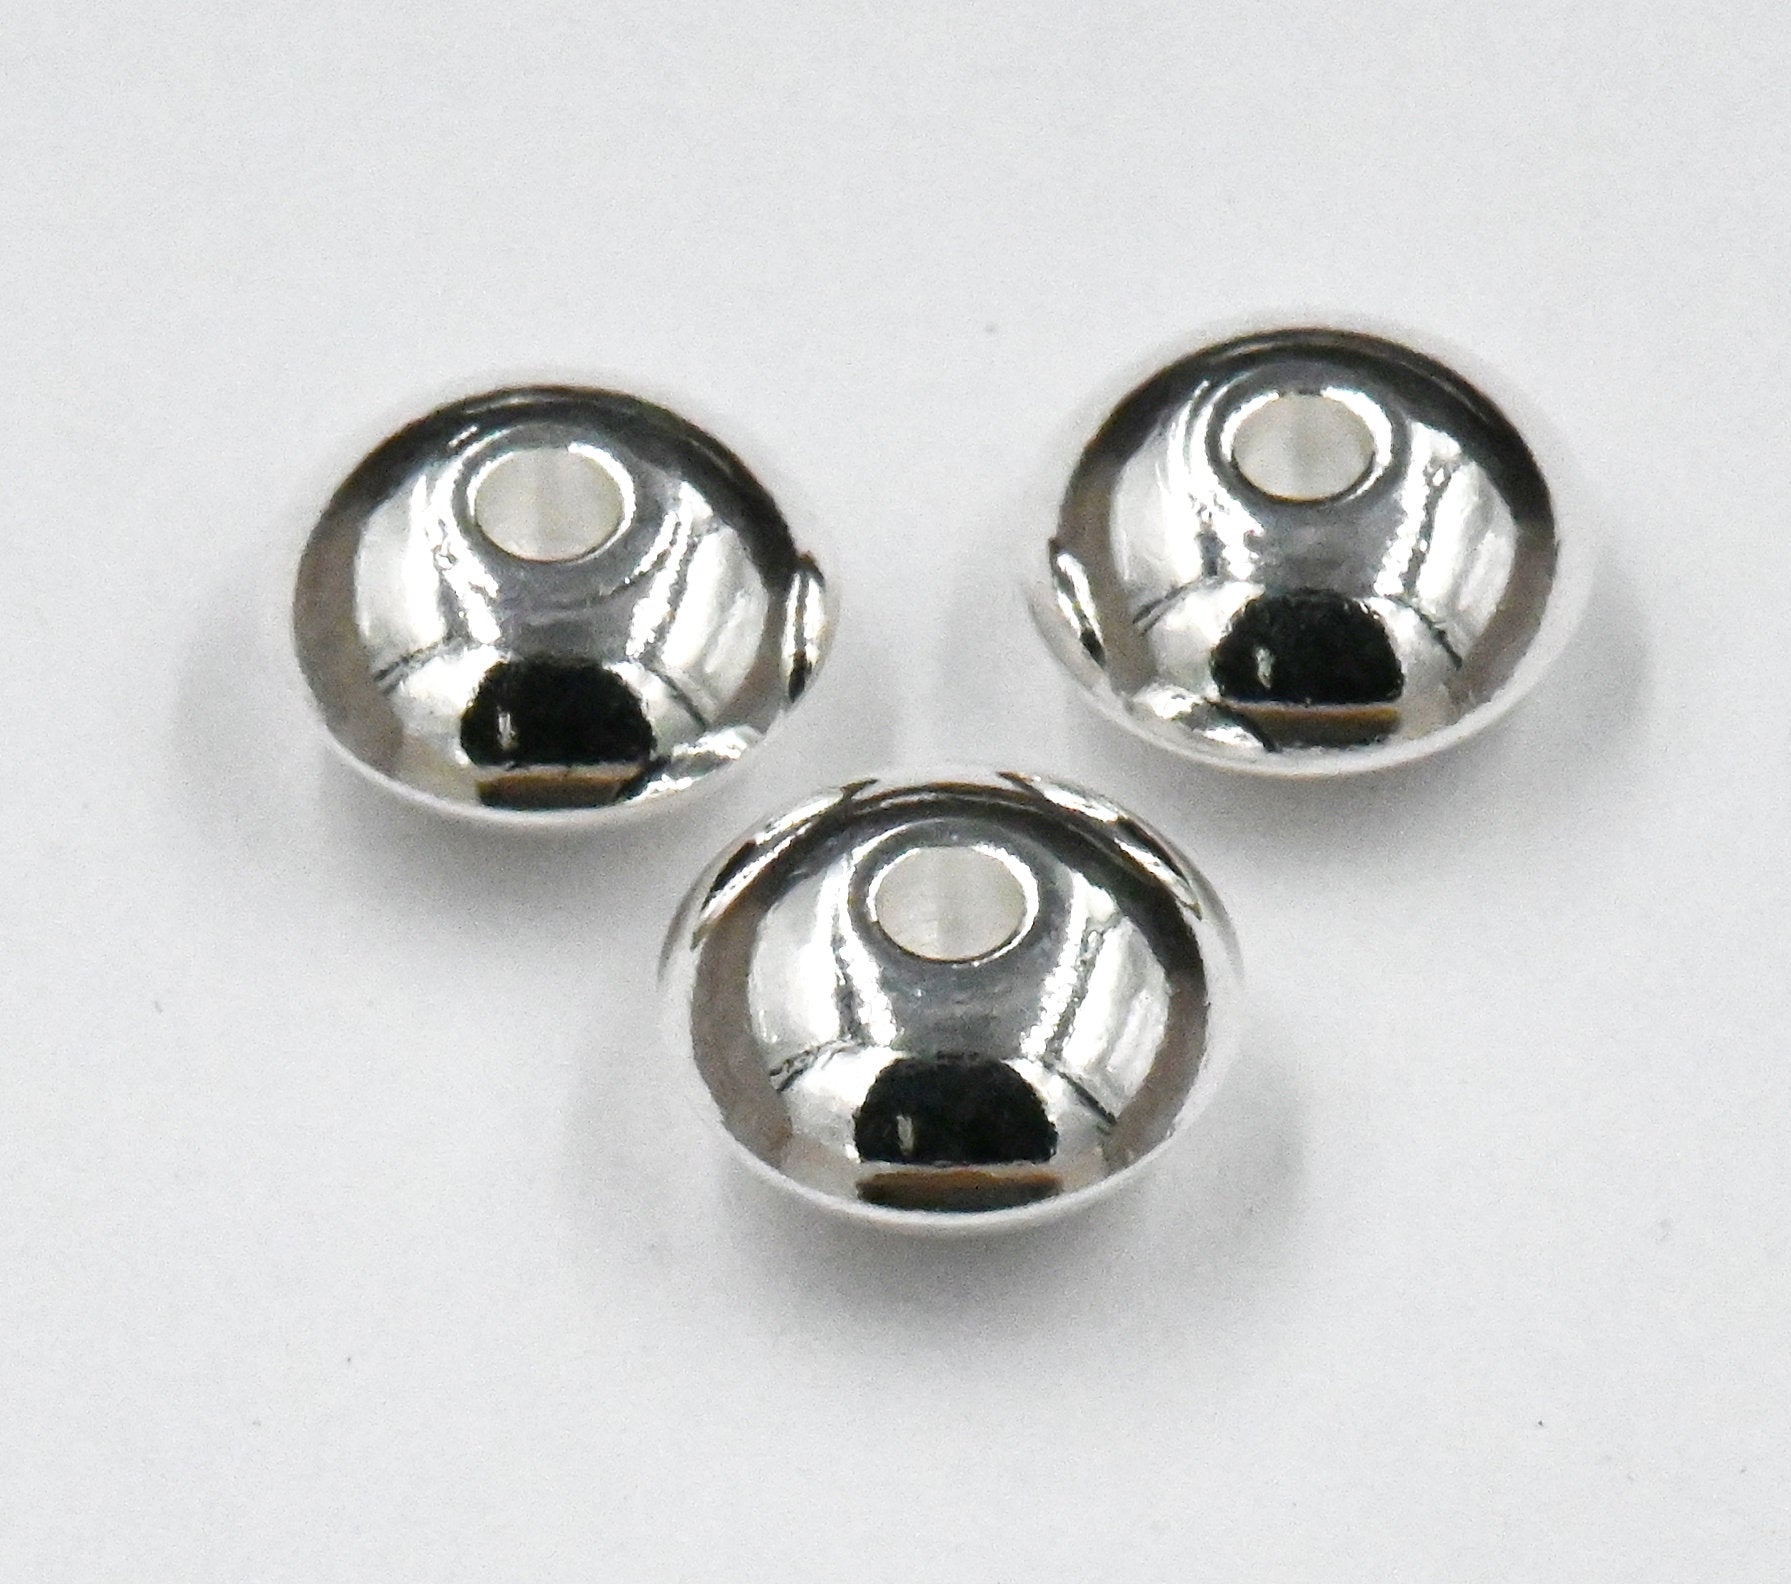 Bright Silver Stainless Steel Rondelle Saucer Spacer 10pc, 4mm 6mm 8mm Beads